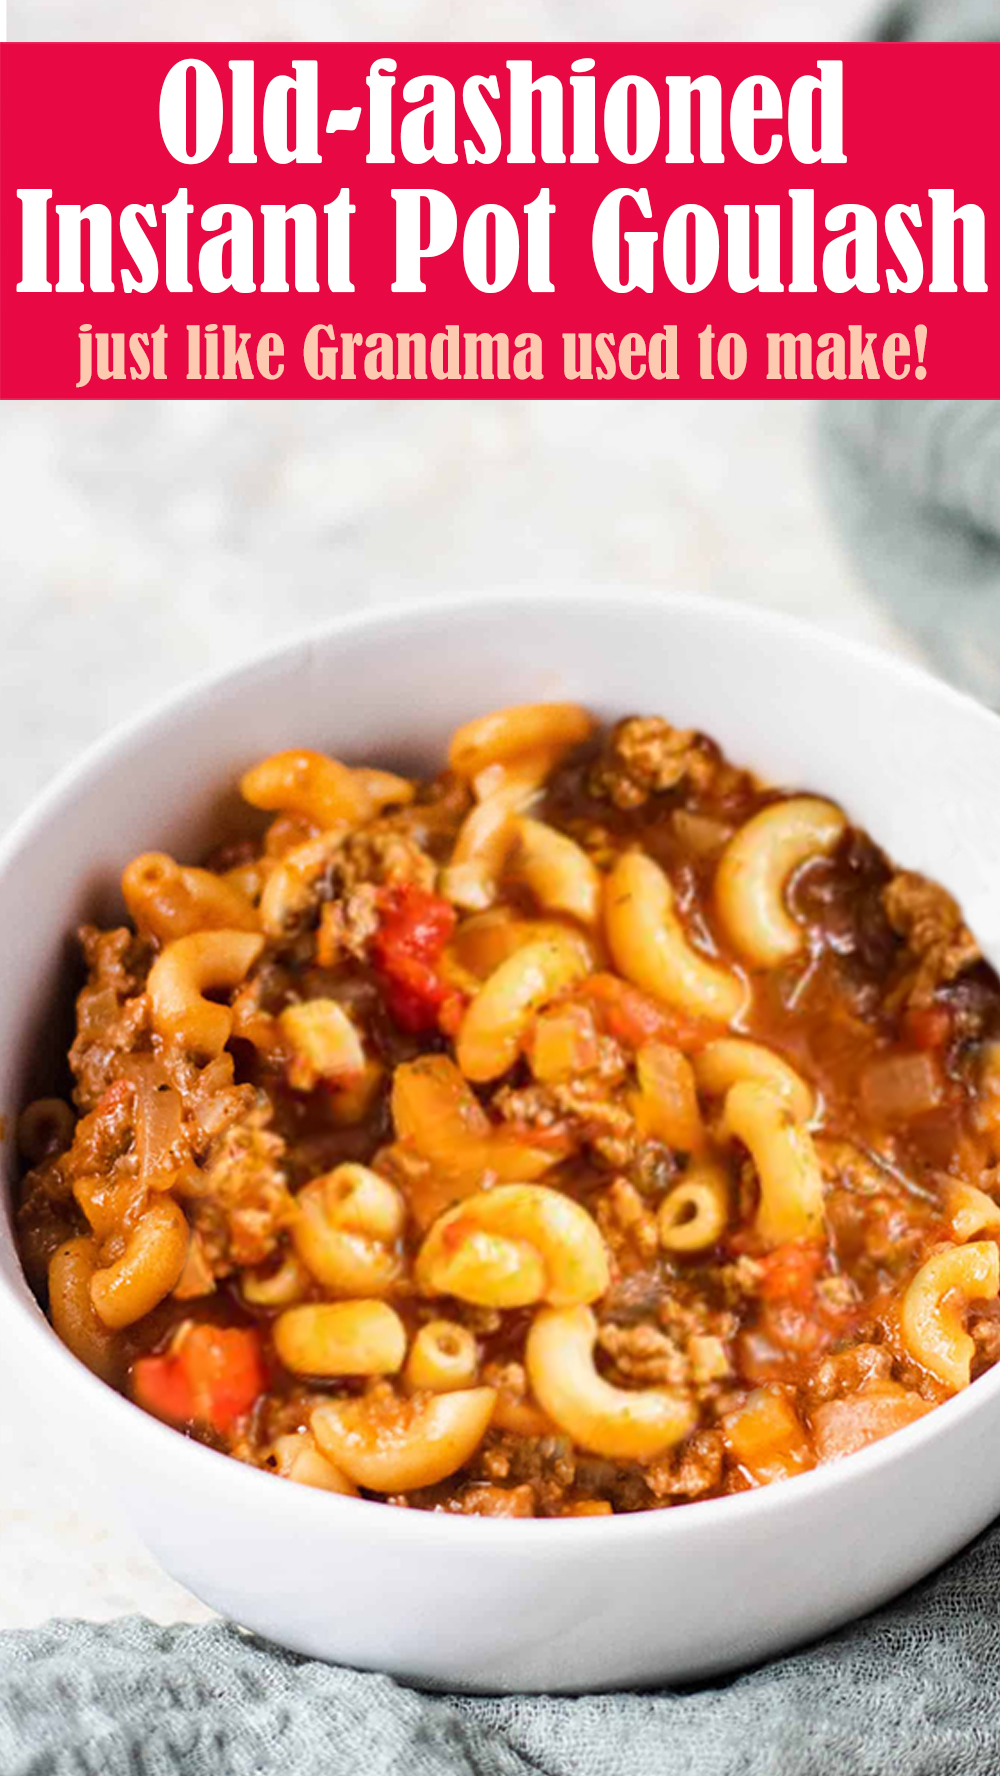 Old-fashioned Instant Pot Goulash Recipe